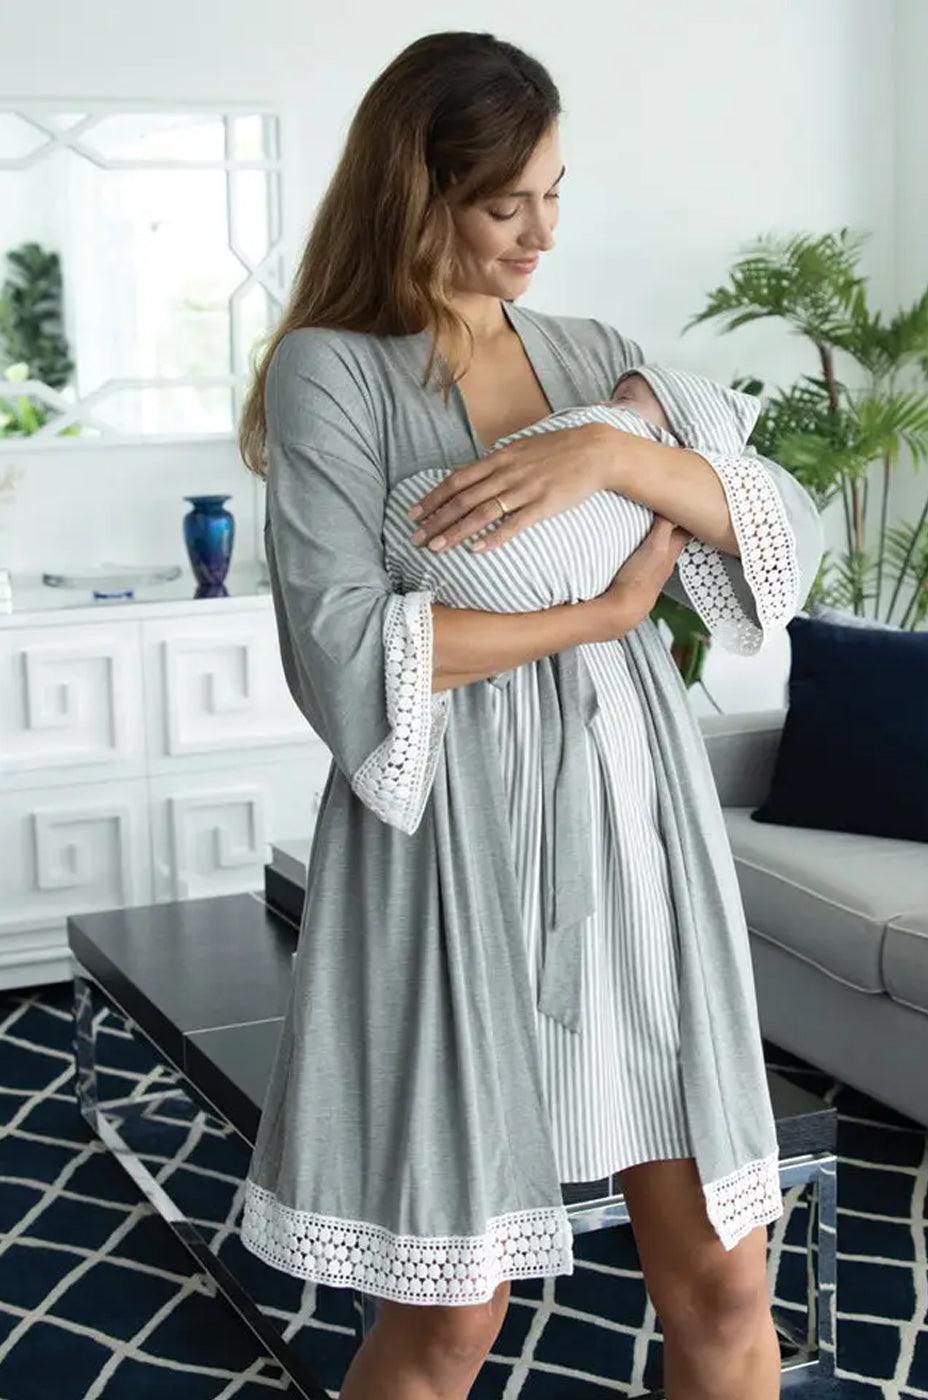 The Boutique Affair Maternity - The Sleep Kit - Maternity Nightwear Button  down maternity nightie Modal maternity dressing gown Cotton maternity sleep  bra A hospital bag essential Our sweet dreams essentials, the